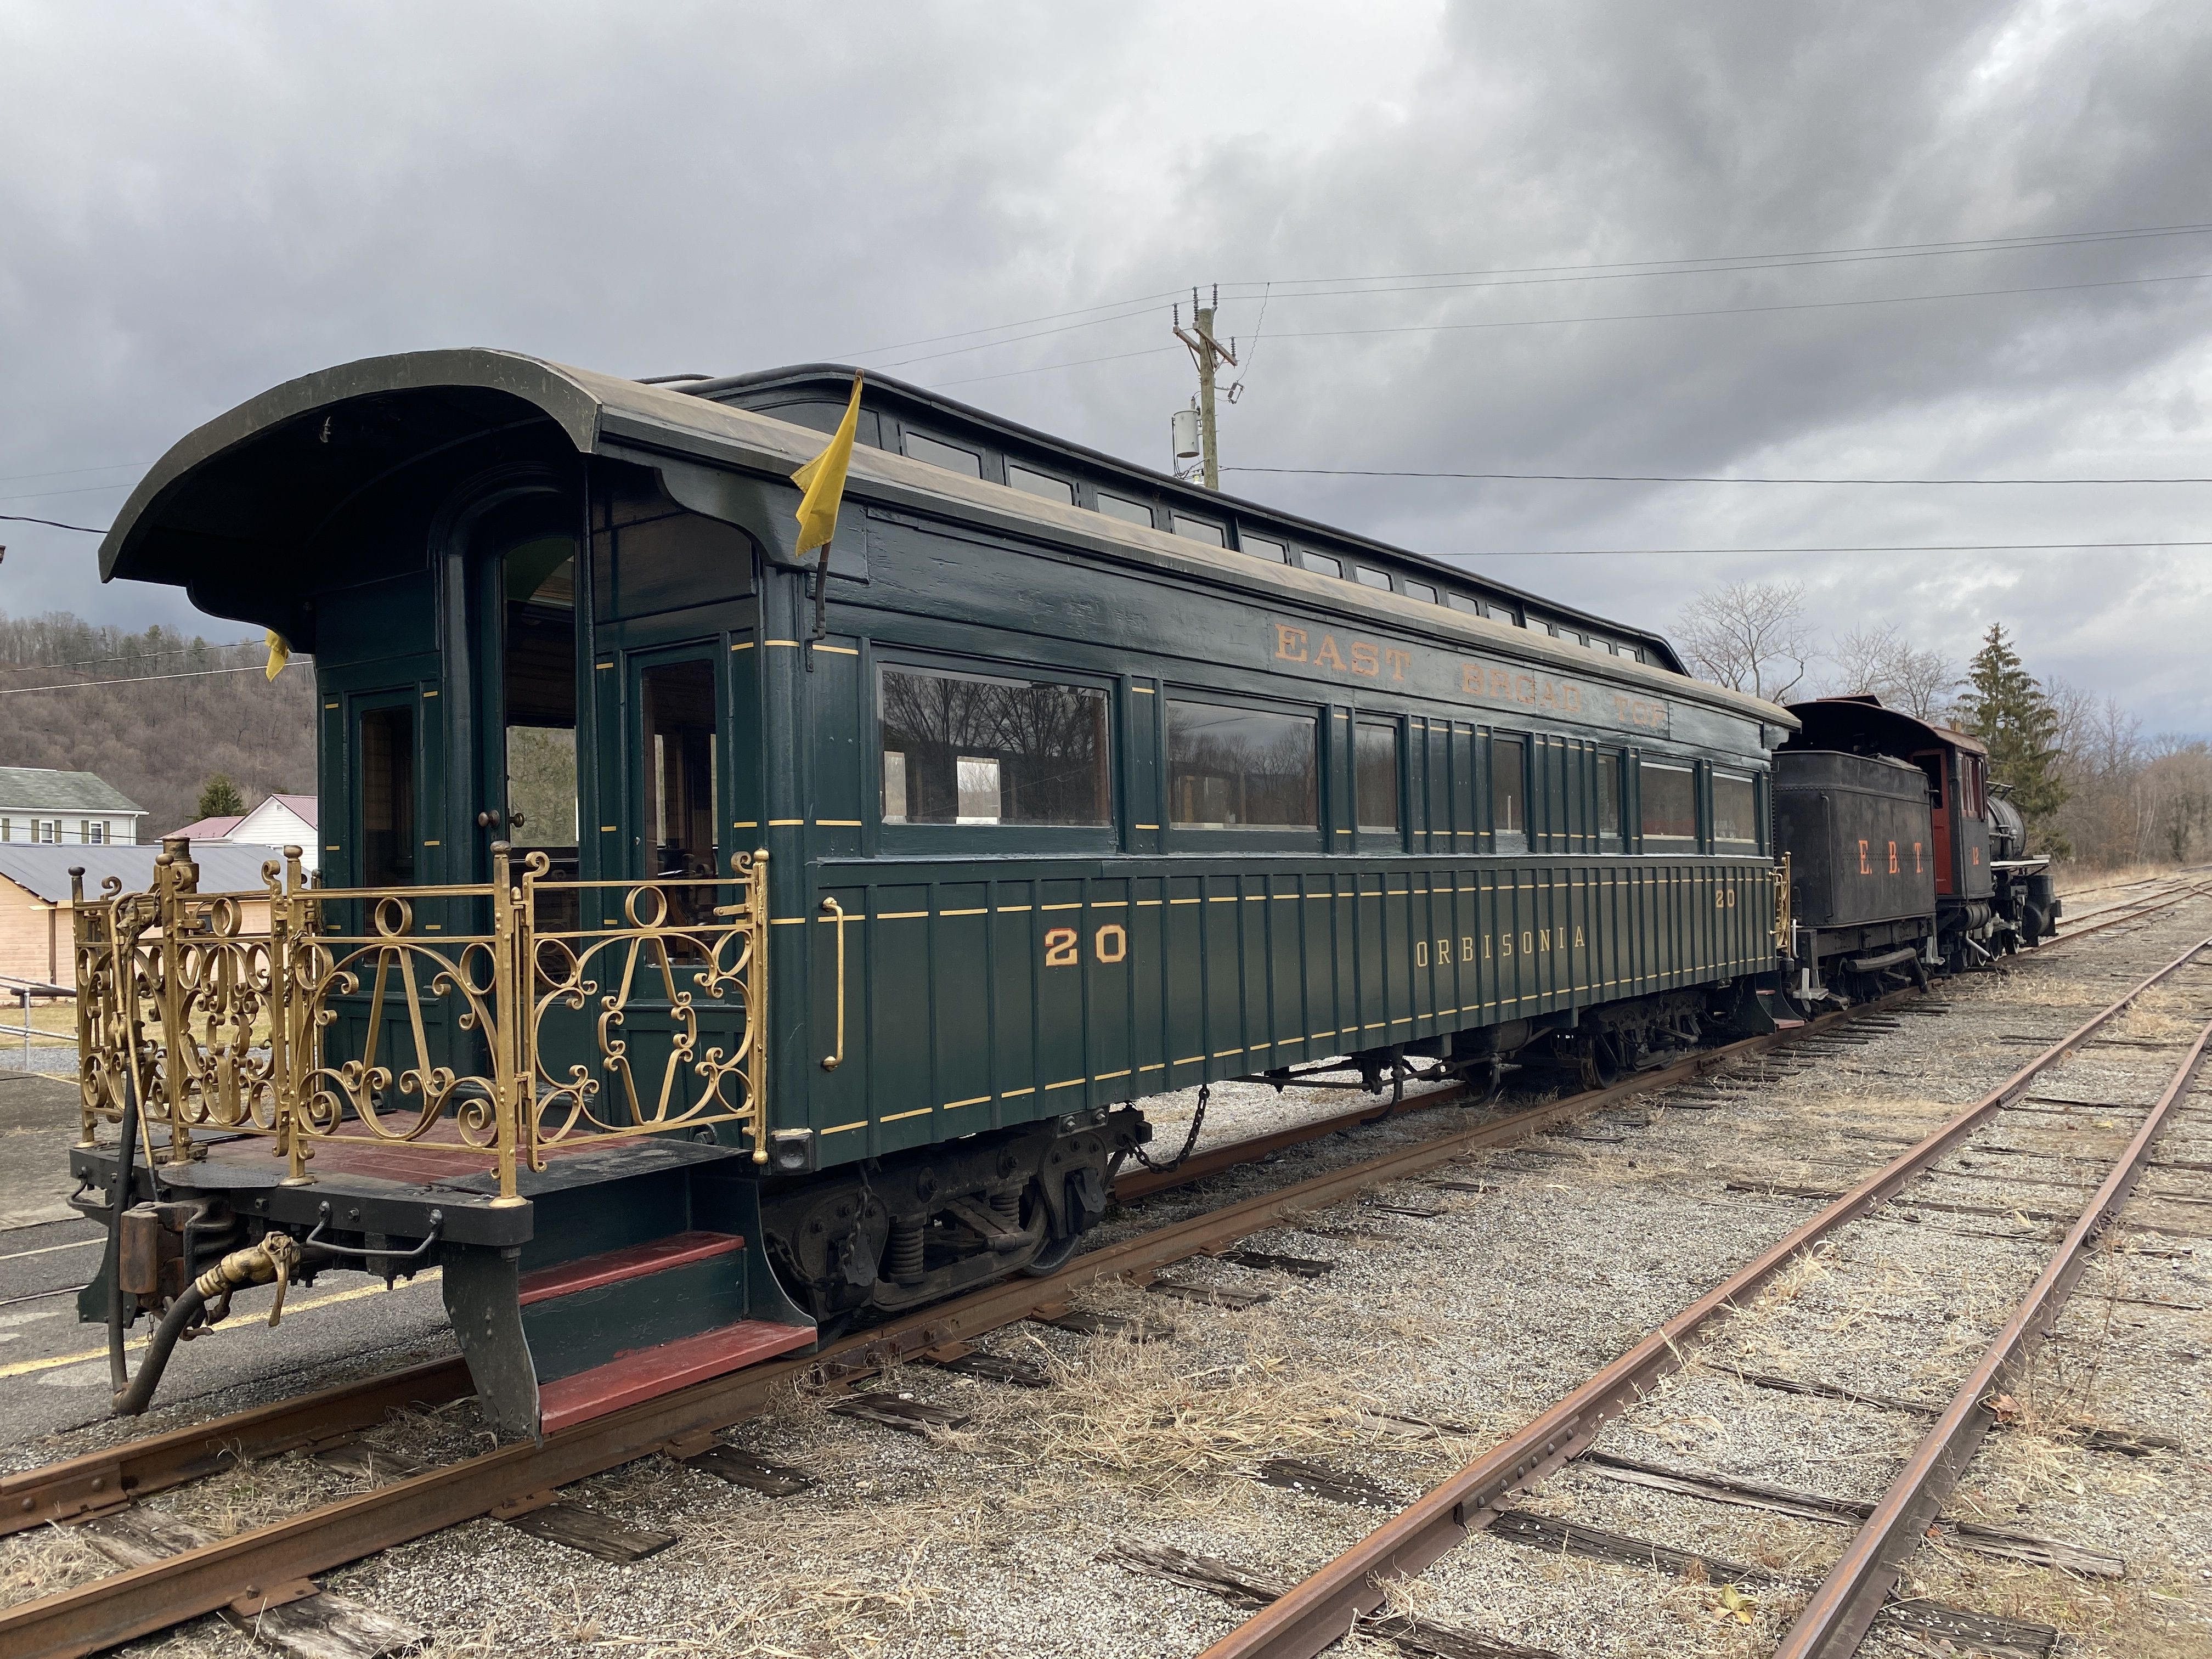 Home • East Broad Top Railroad • Train Rides and More!